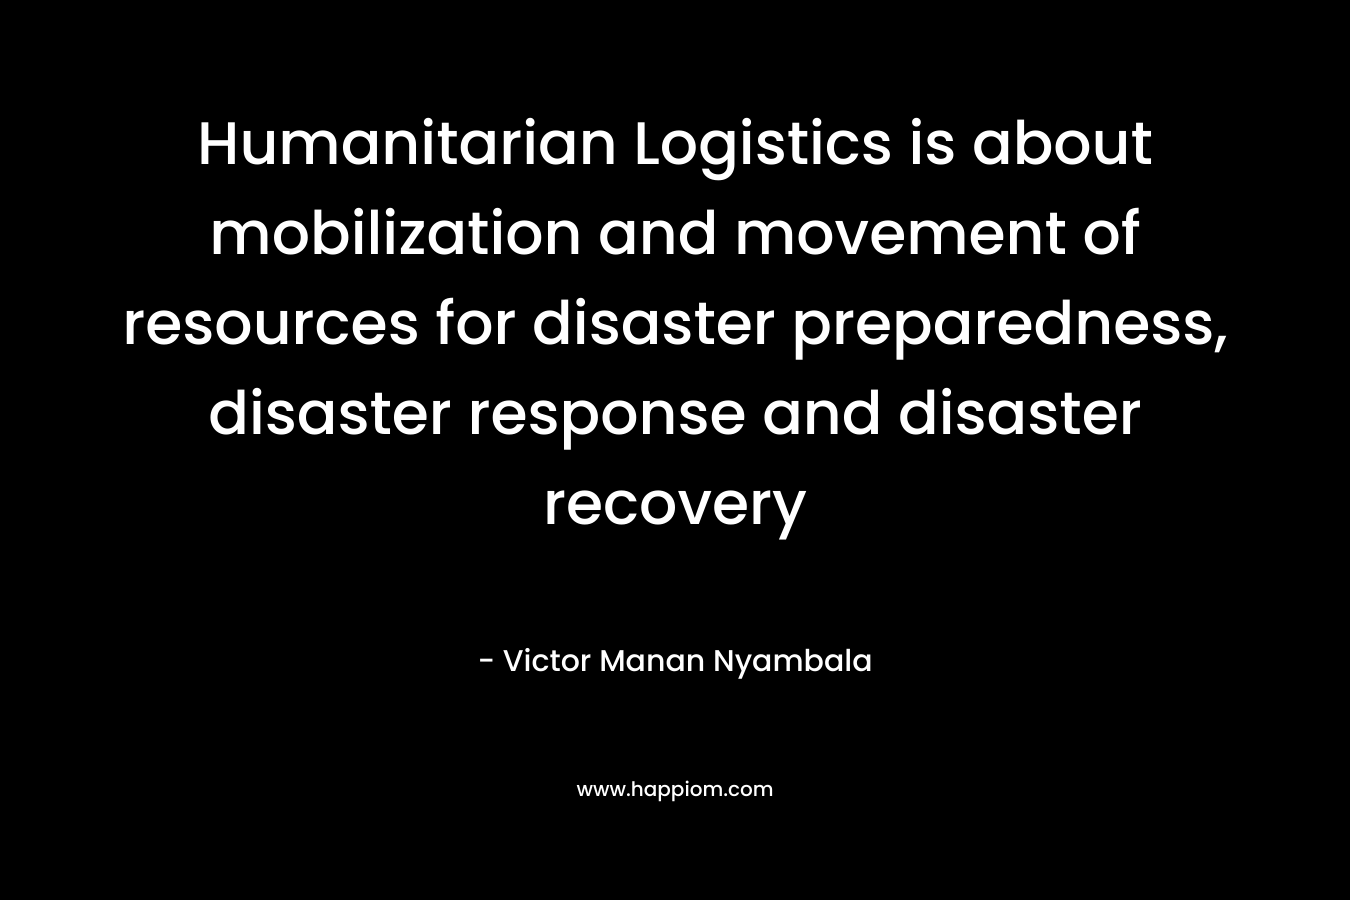 Humanitarian Logistics is about mobilization and movement of resources for disaster preparedness, disaster response and disaster recovery